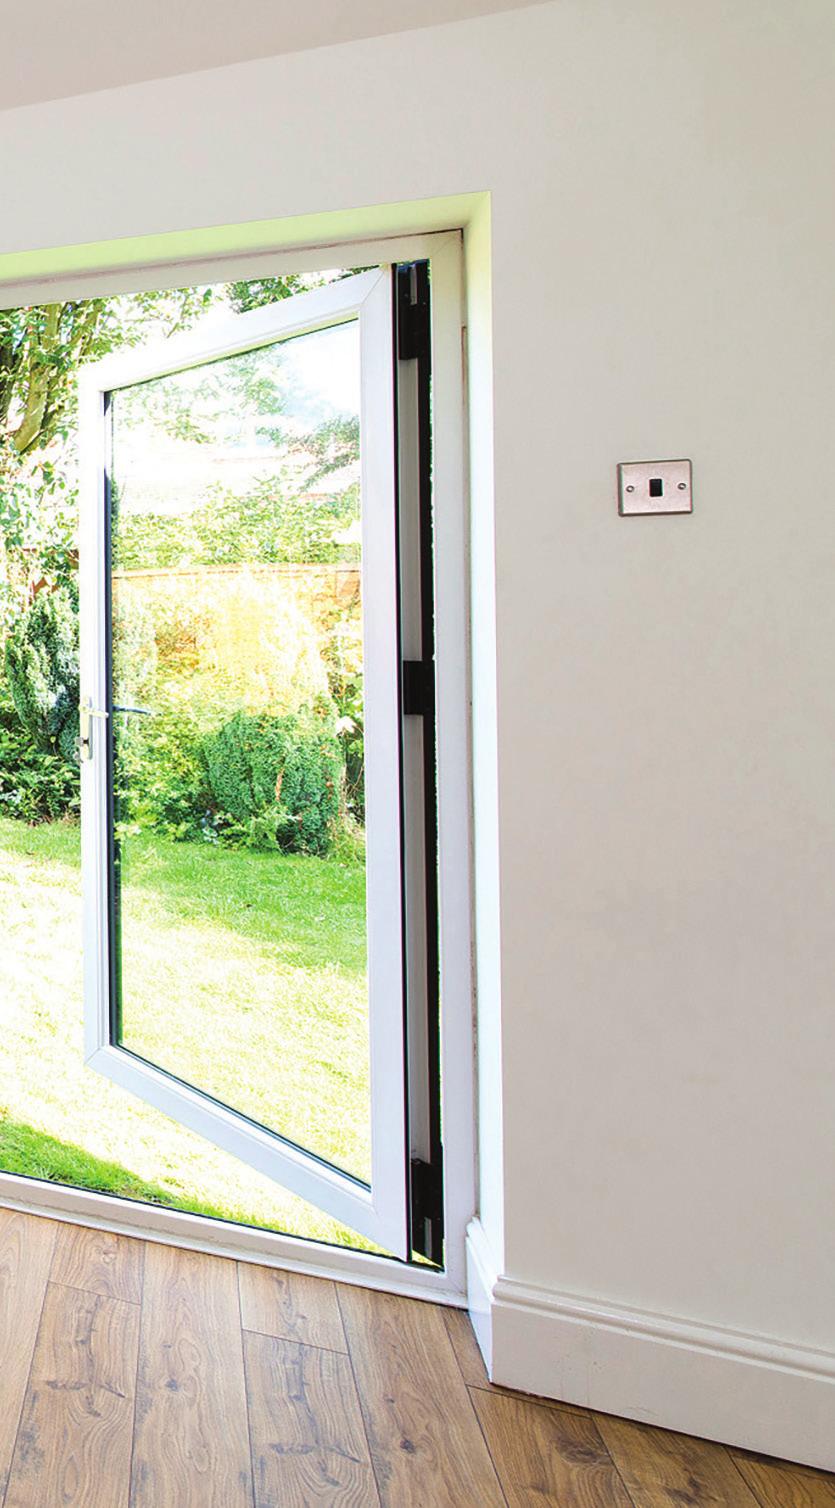 KAT upvc Bifolding doors are custom designed, with totally bespoke components, allowing